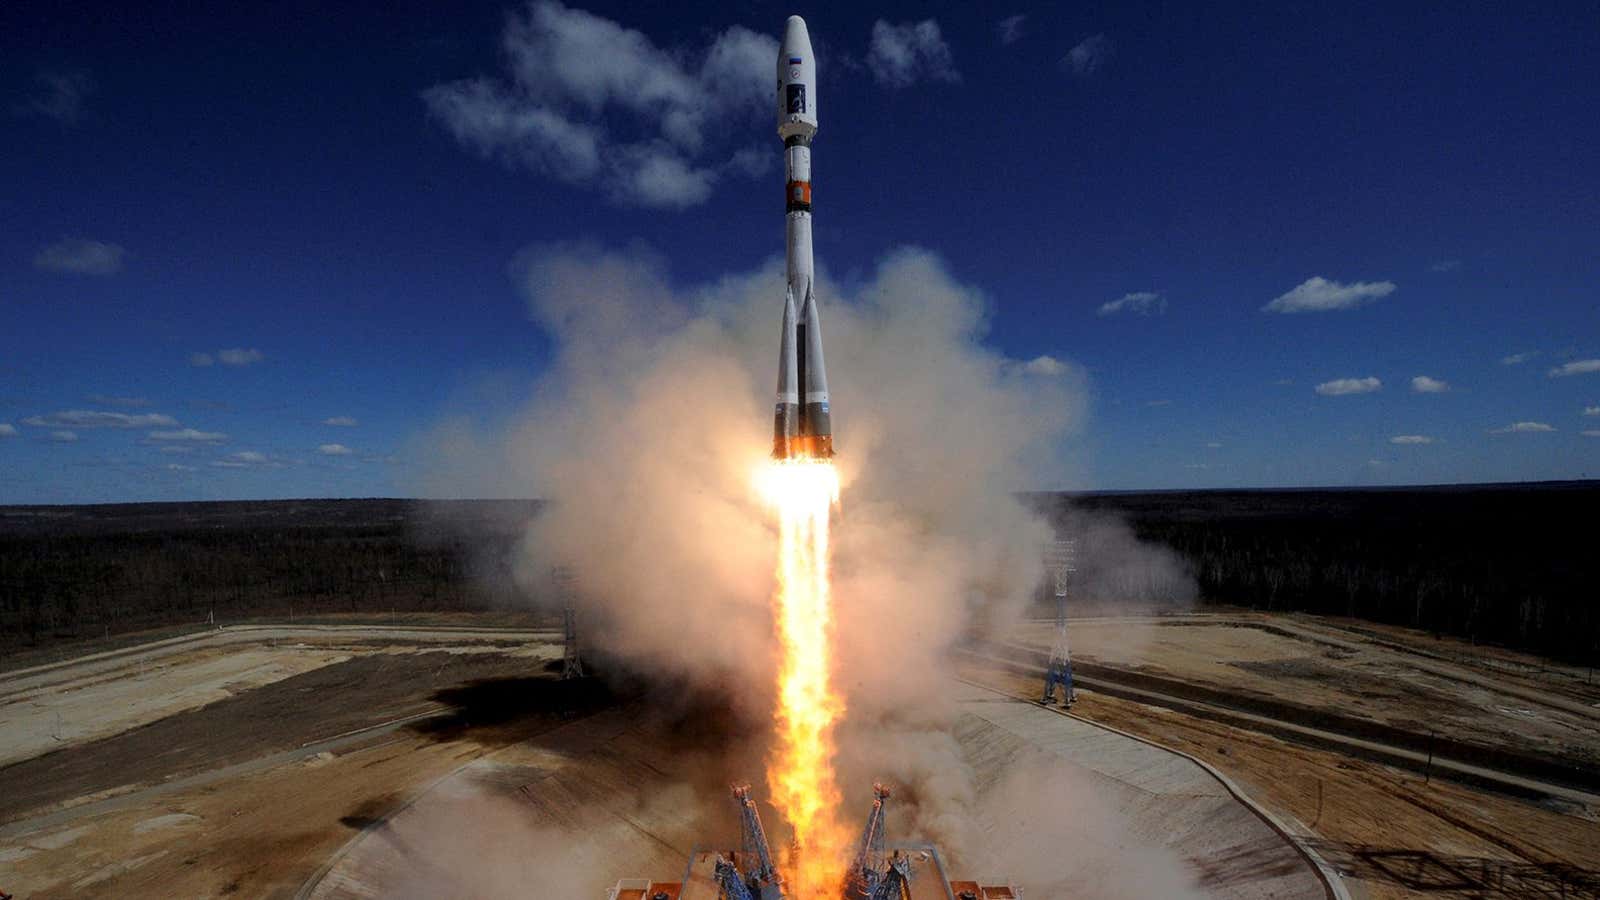 A Russian Soyuz 2.1A rocket lifts off from the launch pad at the new Vostochny cosmodrome outside the city of Uglegorsk, Russia on April 28, 2016.